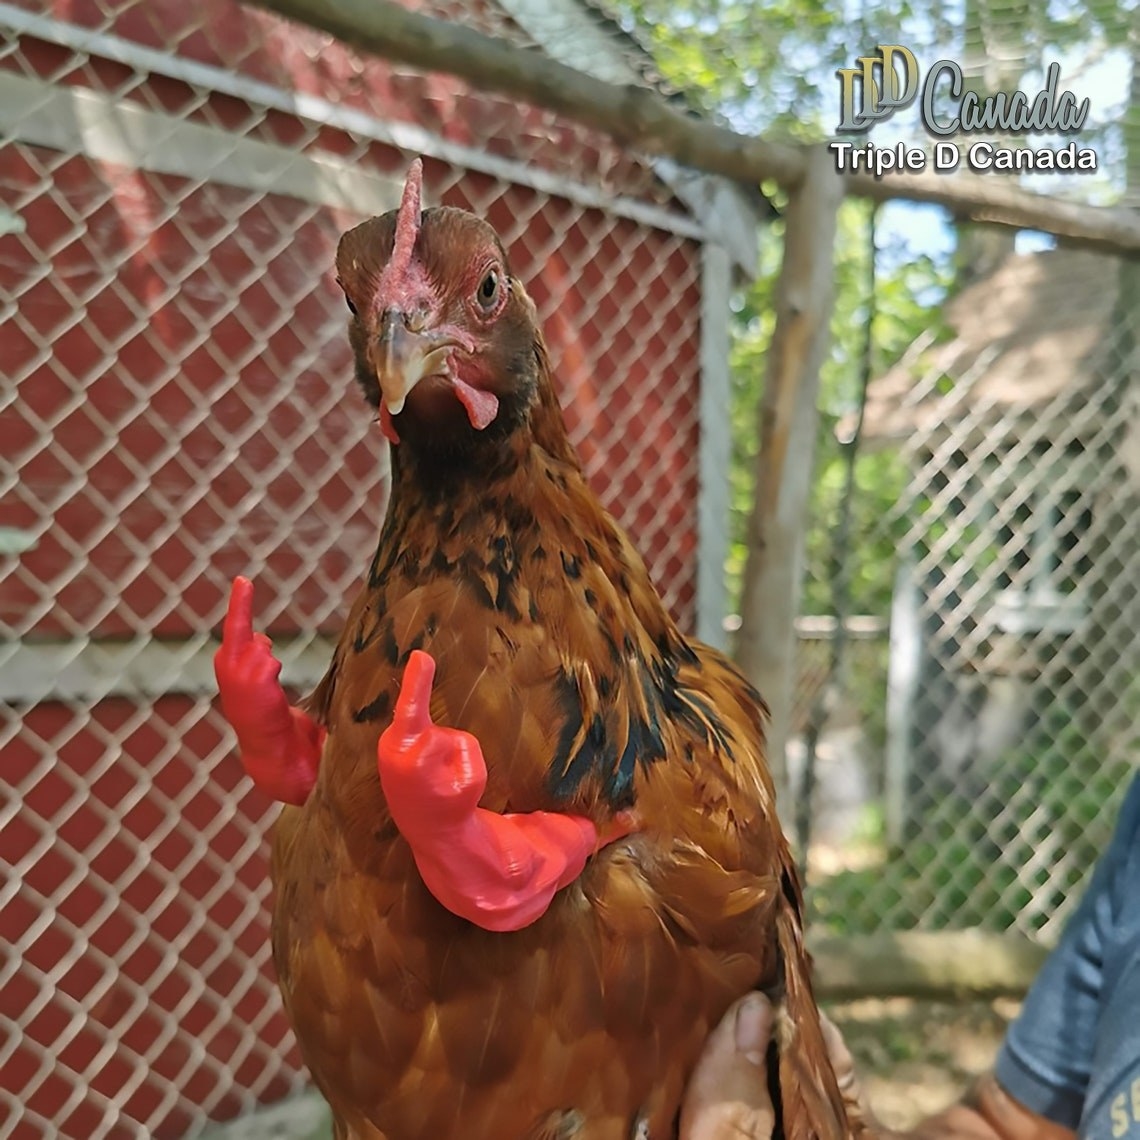 chicken with plastic arms doing the middle finger gesture